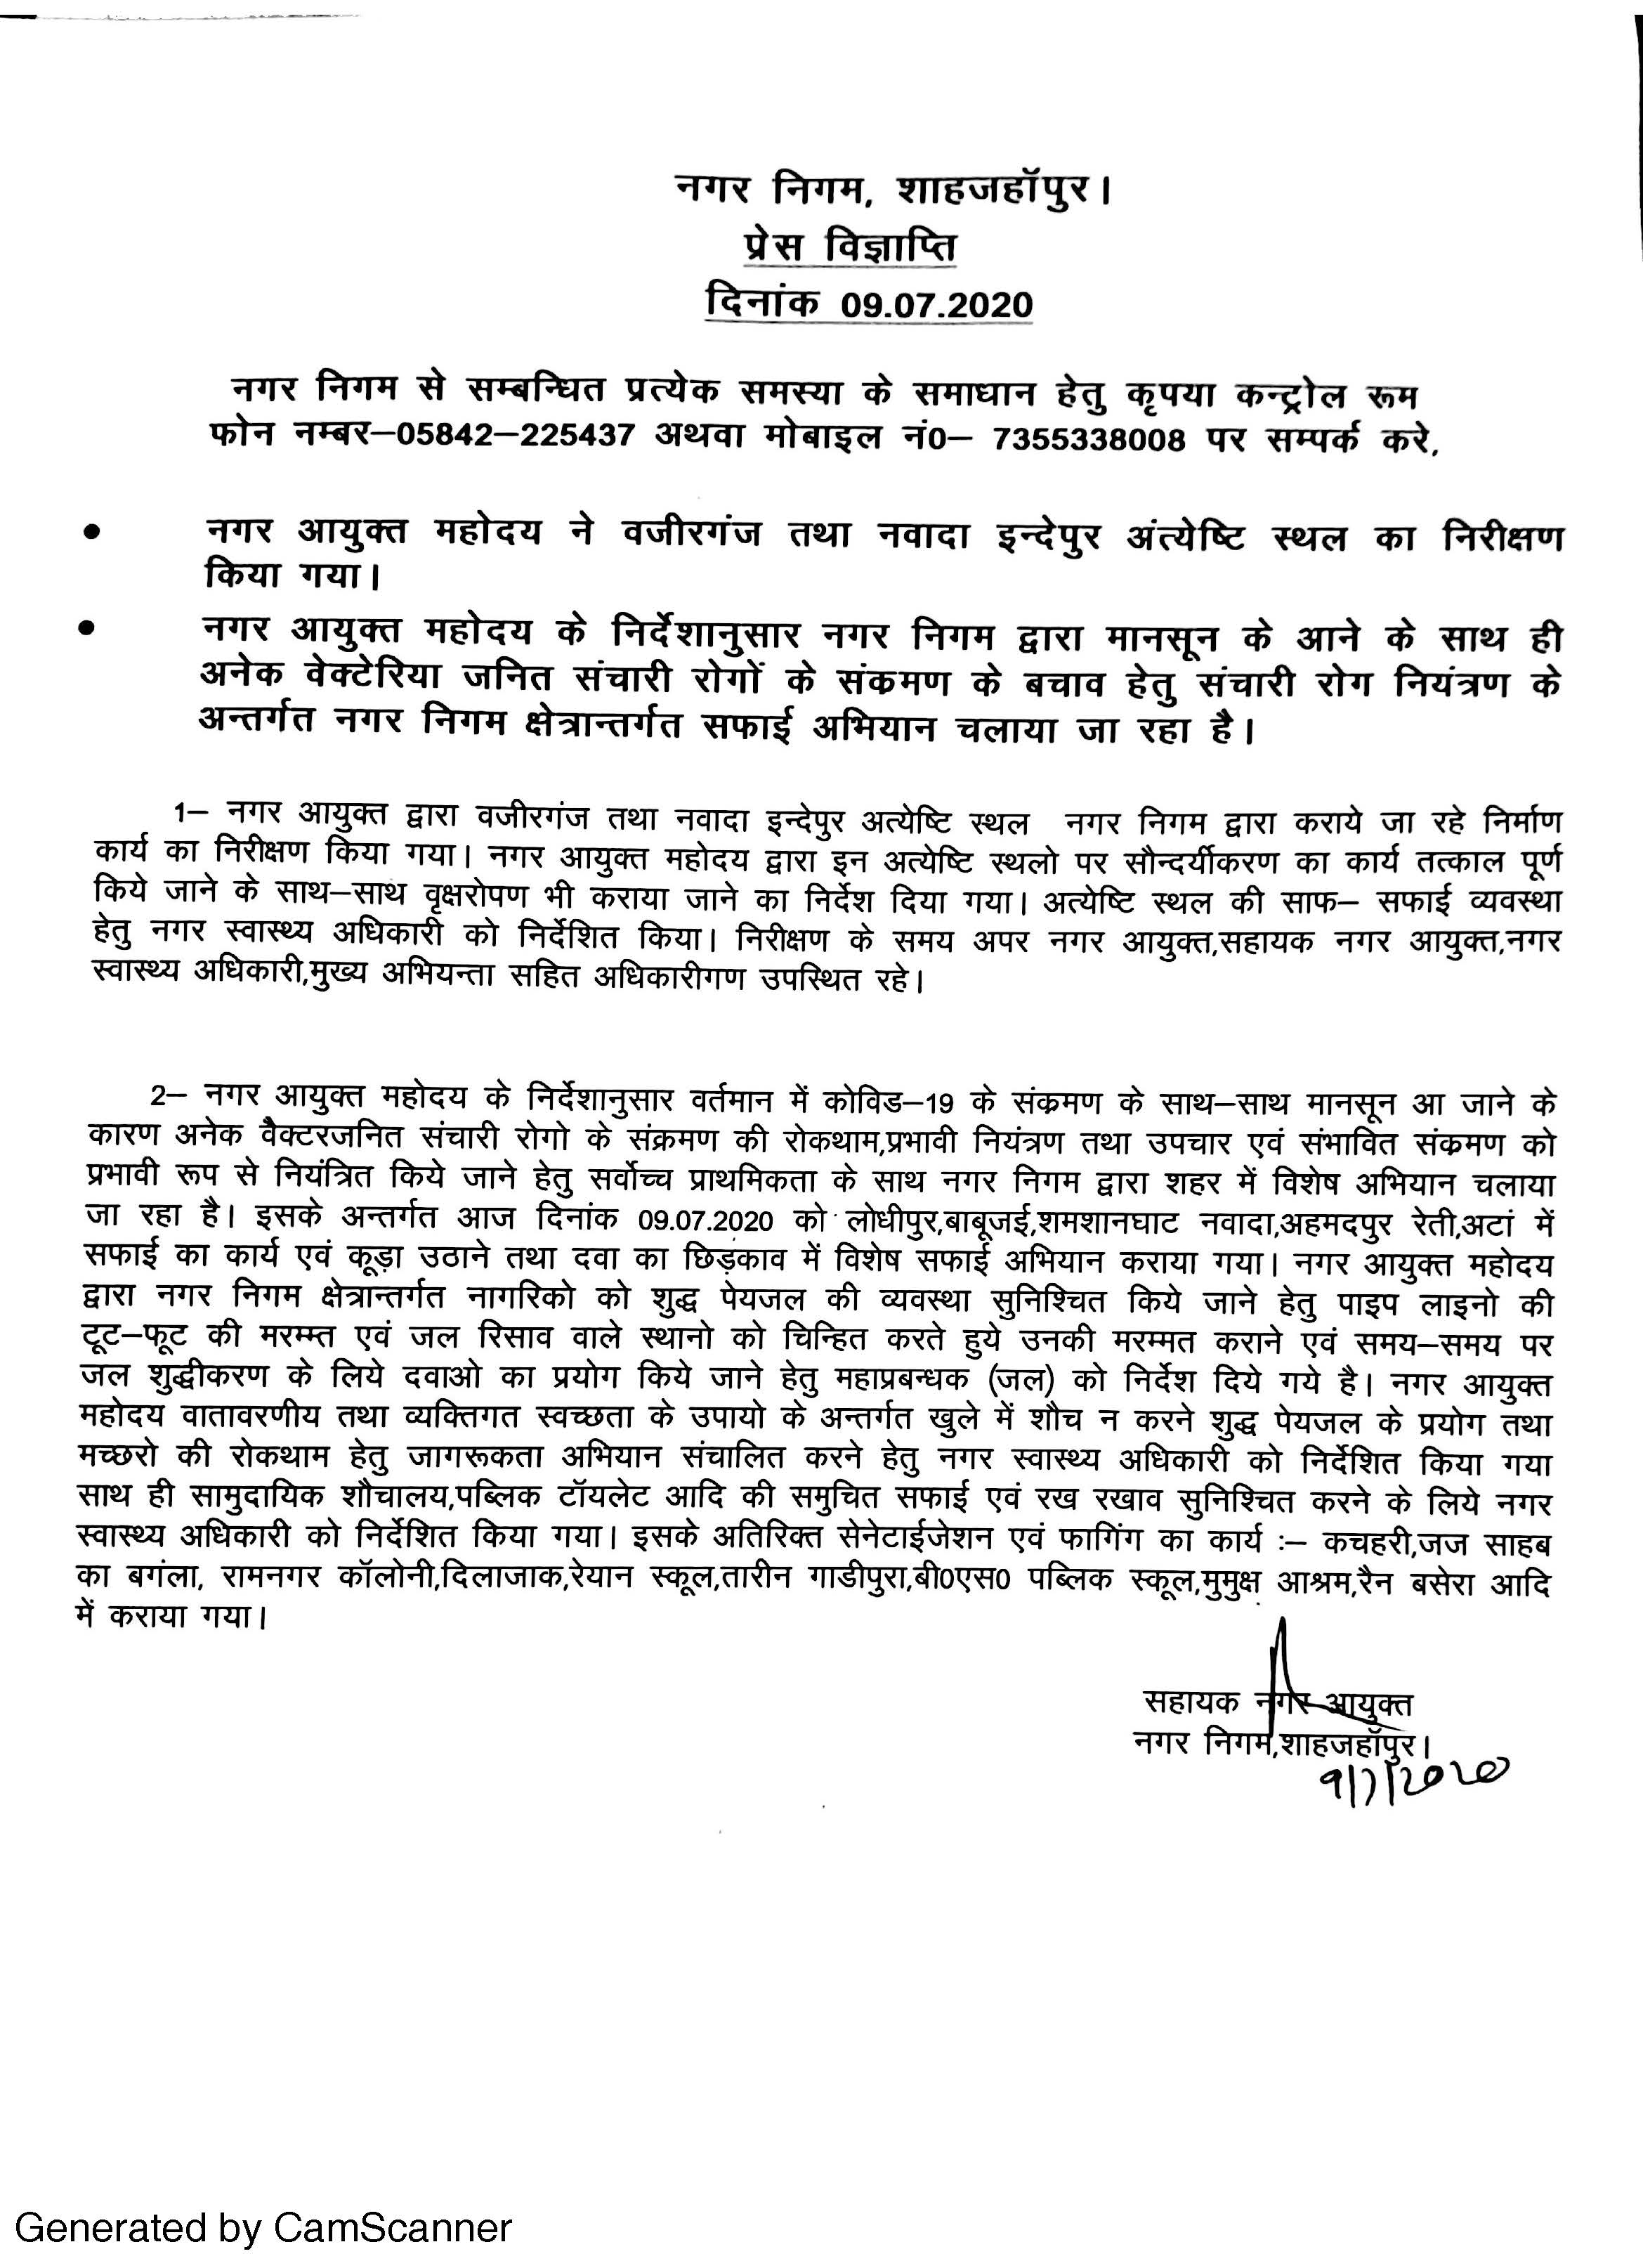 Regarding press release against the sanitation works carried out in the city on 09.07.2020 according to the guidelines of Municipal Commissioner